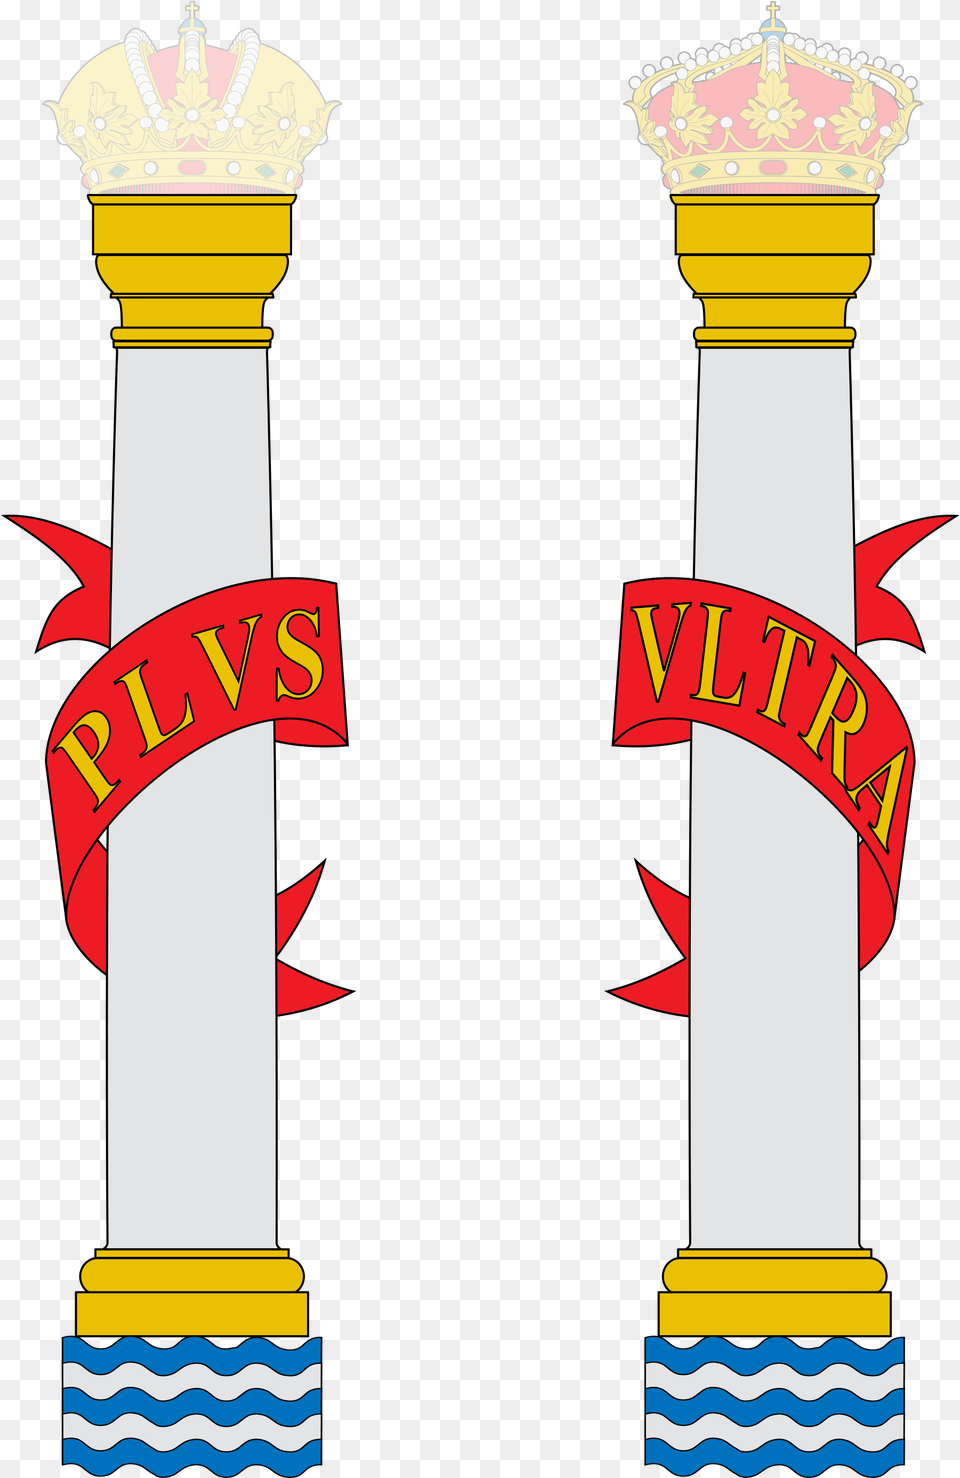 Spain Arms Pillars Coat Of Arms Of Spain, Architecture, Pillar Png Image